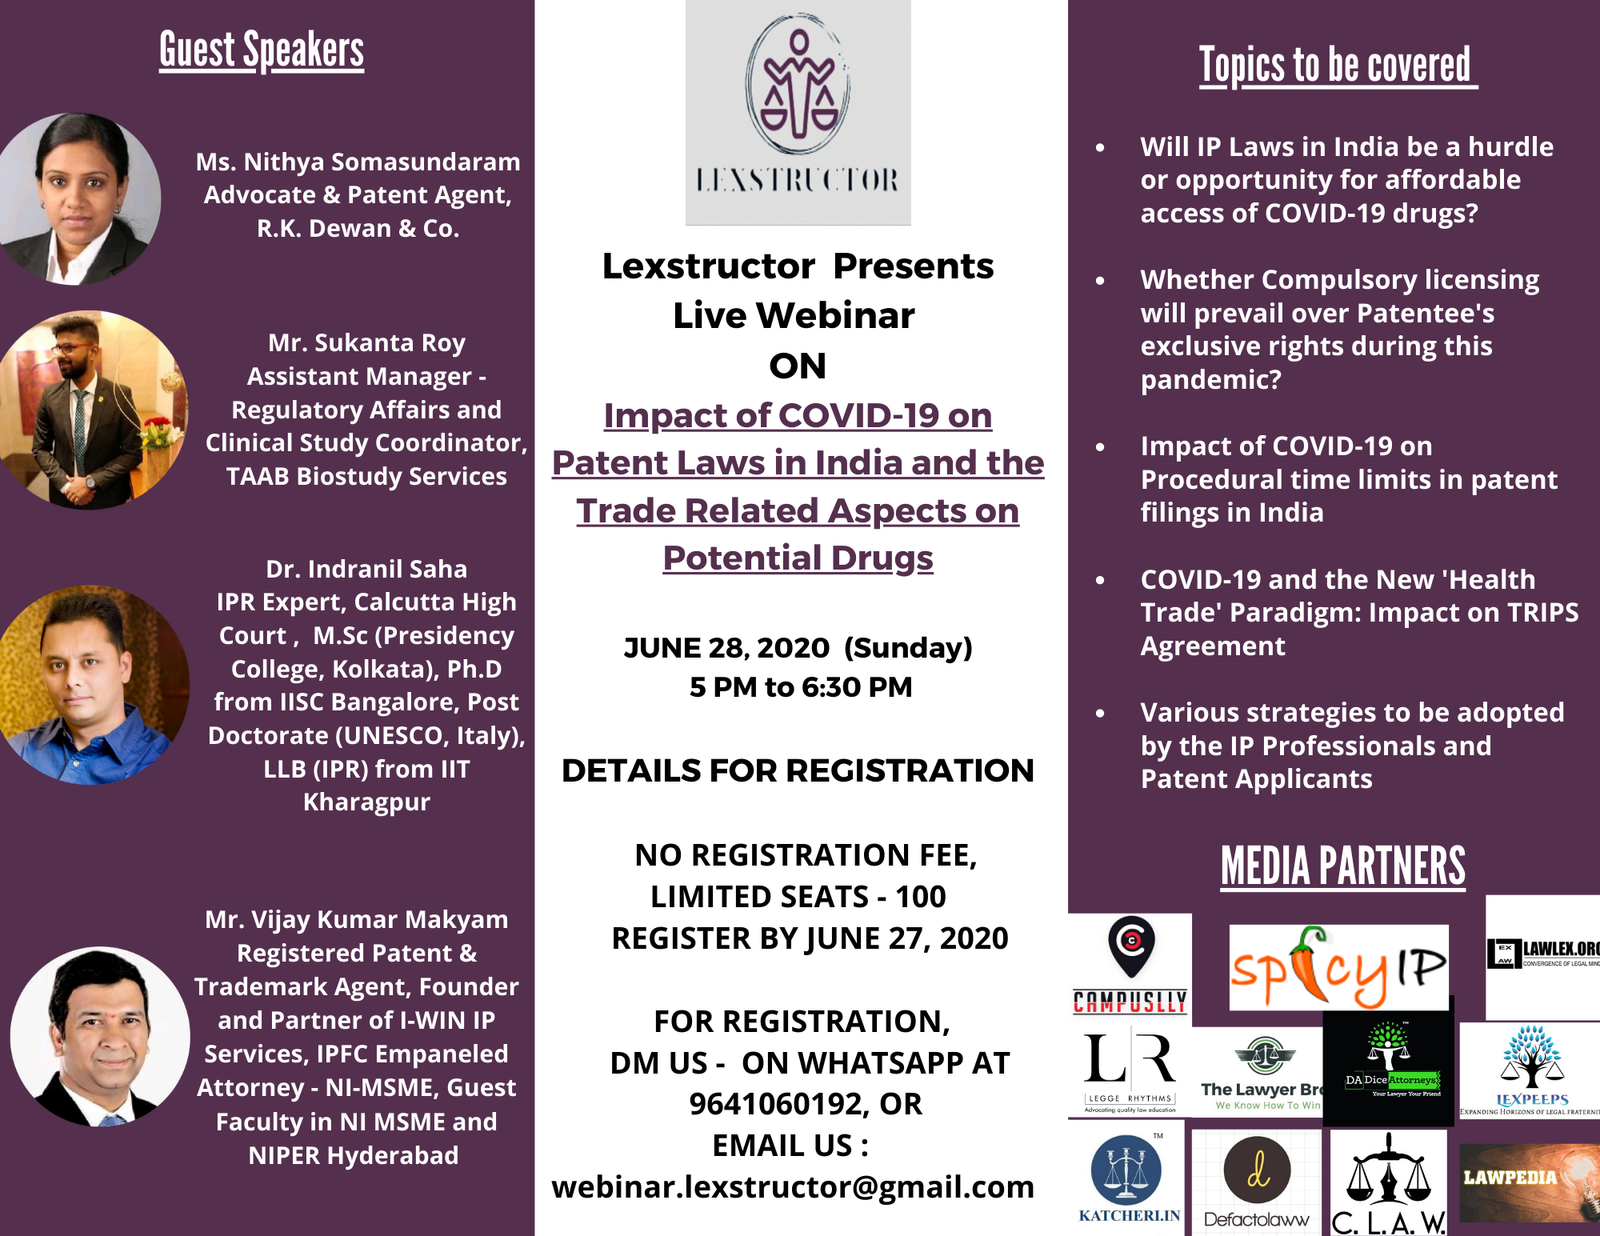 WEBINAR ON “IMPACT OF COVID-19 ON PATENT LAWS IN INDIA AND THE TRADE RELATED ASPECTS ON POTENTIAL DRUGS” ORGANIZED BY LEXSTRUCTOR; NO REGISTRATION FEE;  REGISTER BY JUNE 27